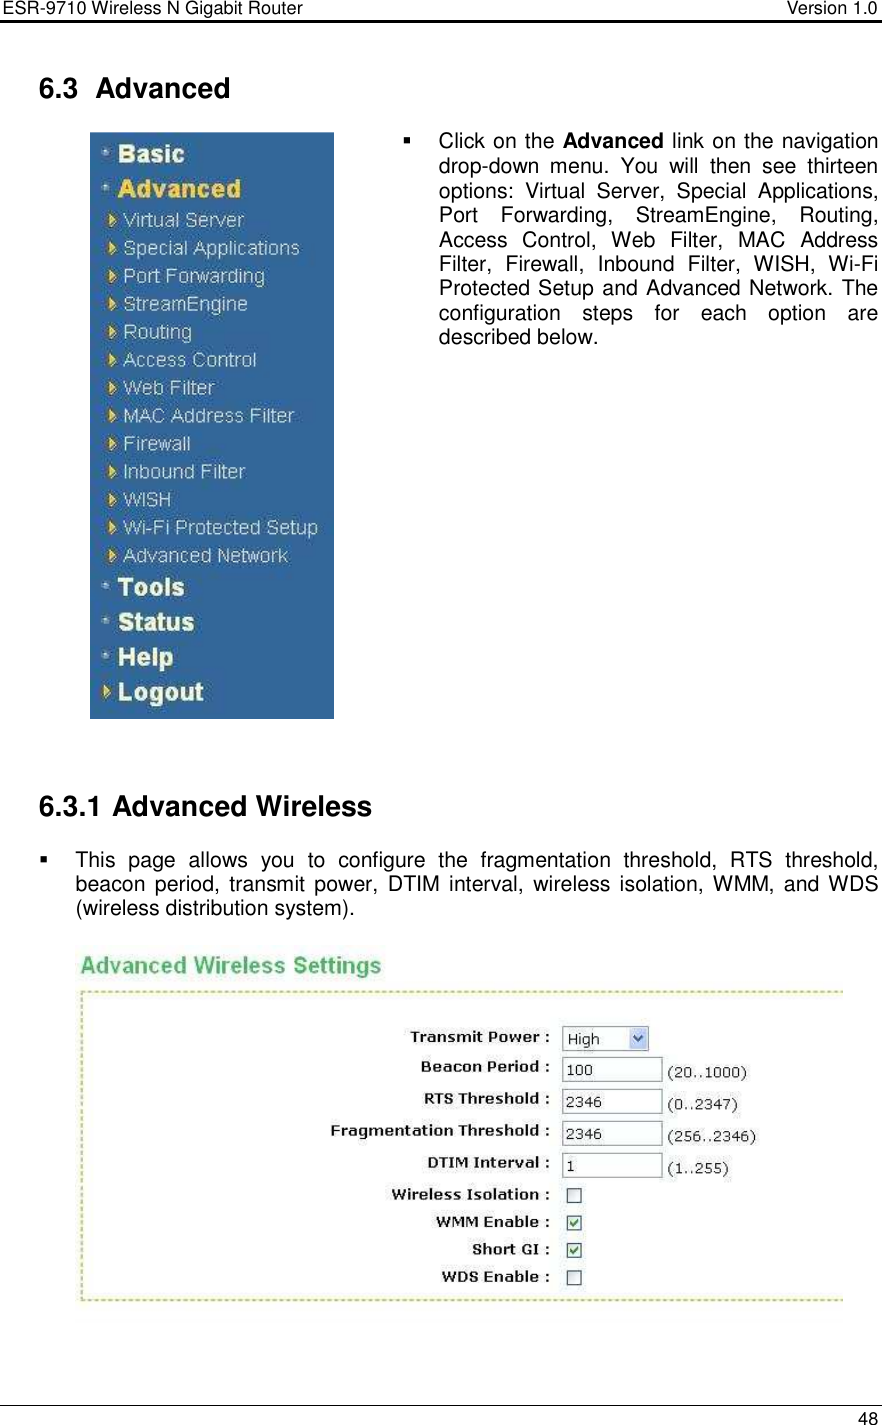 ESR-9710 Wireless N Gigabit Router                                    Version 1.0    48   6.3  Advanced    Click on the Advanced link on the navigation drop-down  menu.  You  will  then  see  thirteen options:  Virtual  Server,  Special  Applications, Port  Forwarding,  StreamEngine,  Routing, Access  Control,  Web  Filter,  MAC  Address Filter,  Firewall,  Inbound  Filter,  WISH,  Wi-Fi Protected Setup and Advanced Network. The configuration  steps  for  each  option  are described below.                     6.3.1 Advanced Wireless   This  page  allows  you  to  configure  the  fragmentation  threshold,  RTS  threshold, beacon period, transmit power,  DTIM interval,  wireless isolation, WMM, and WDS (wireless distribution system).      